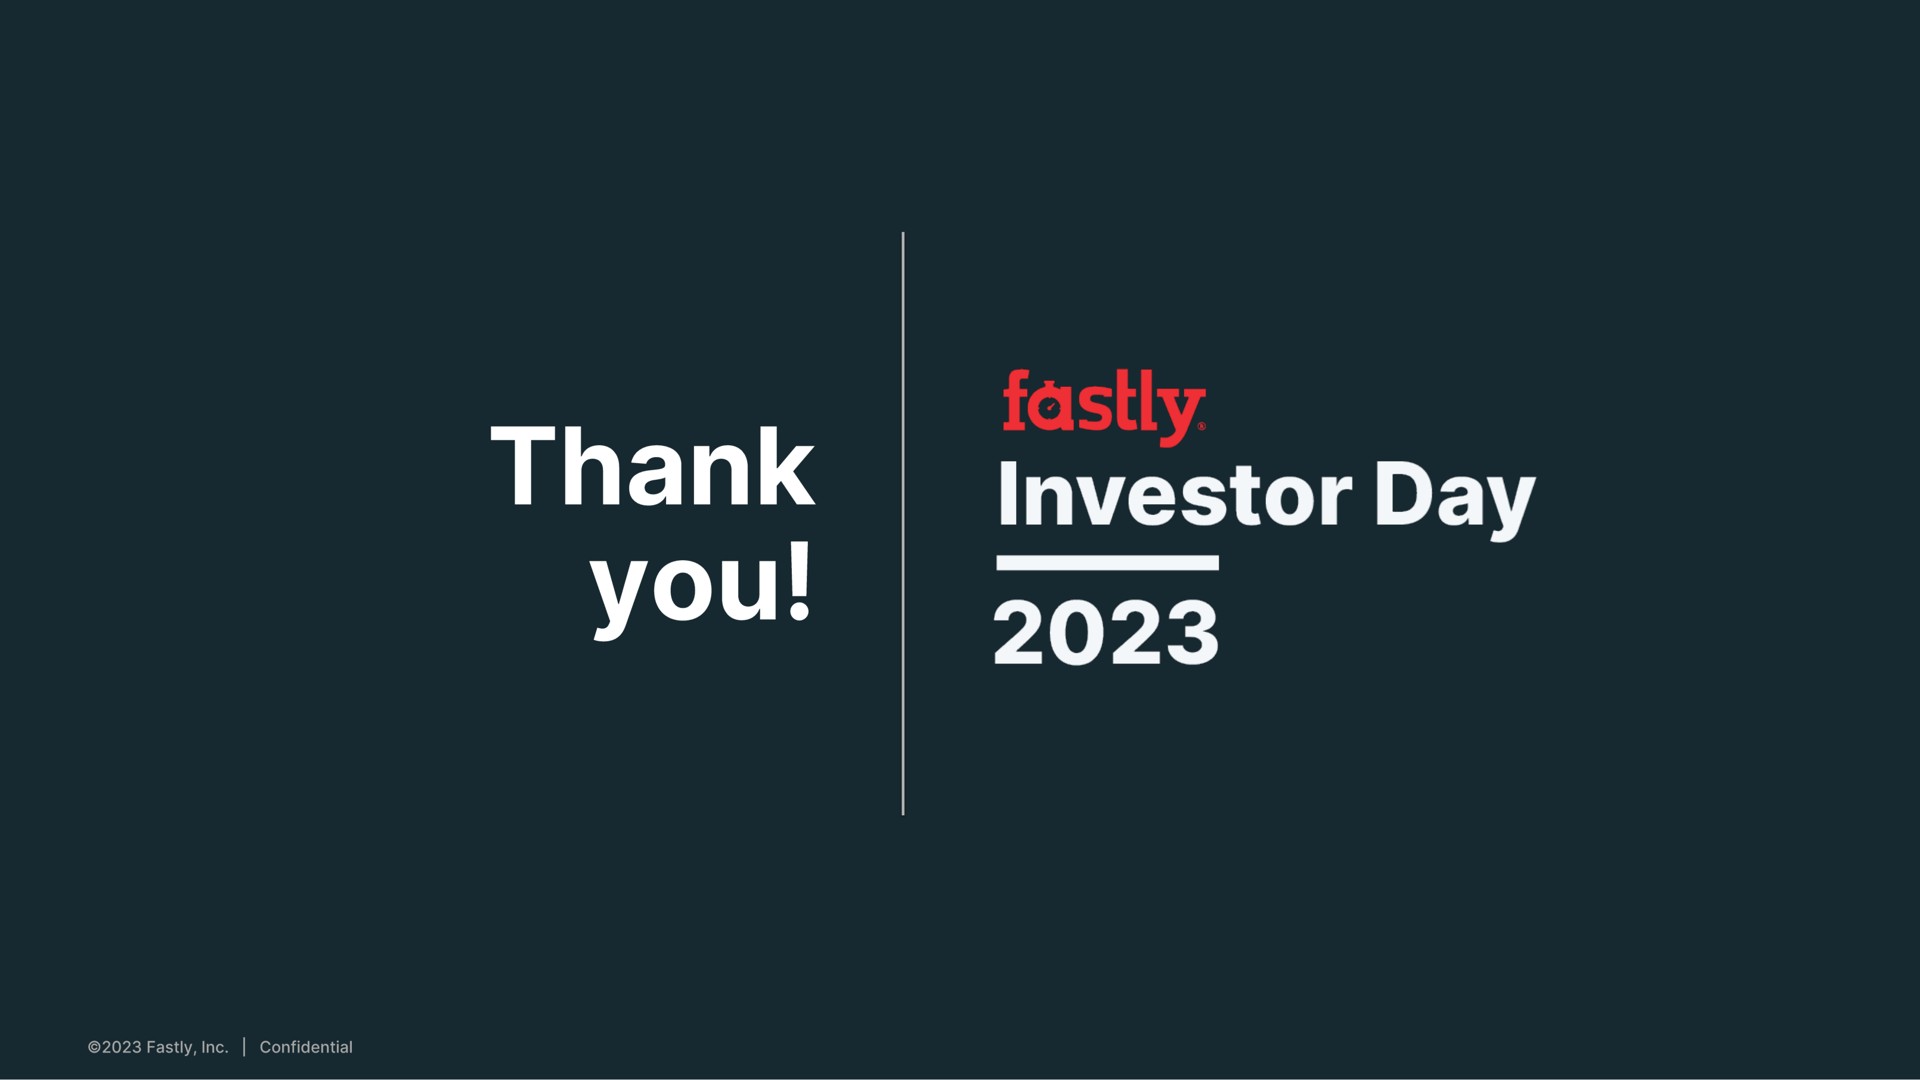 investor day you | Fastly